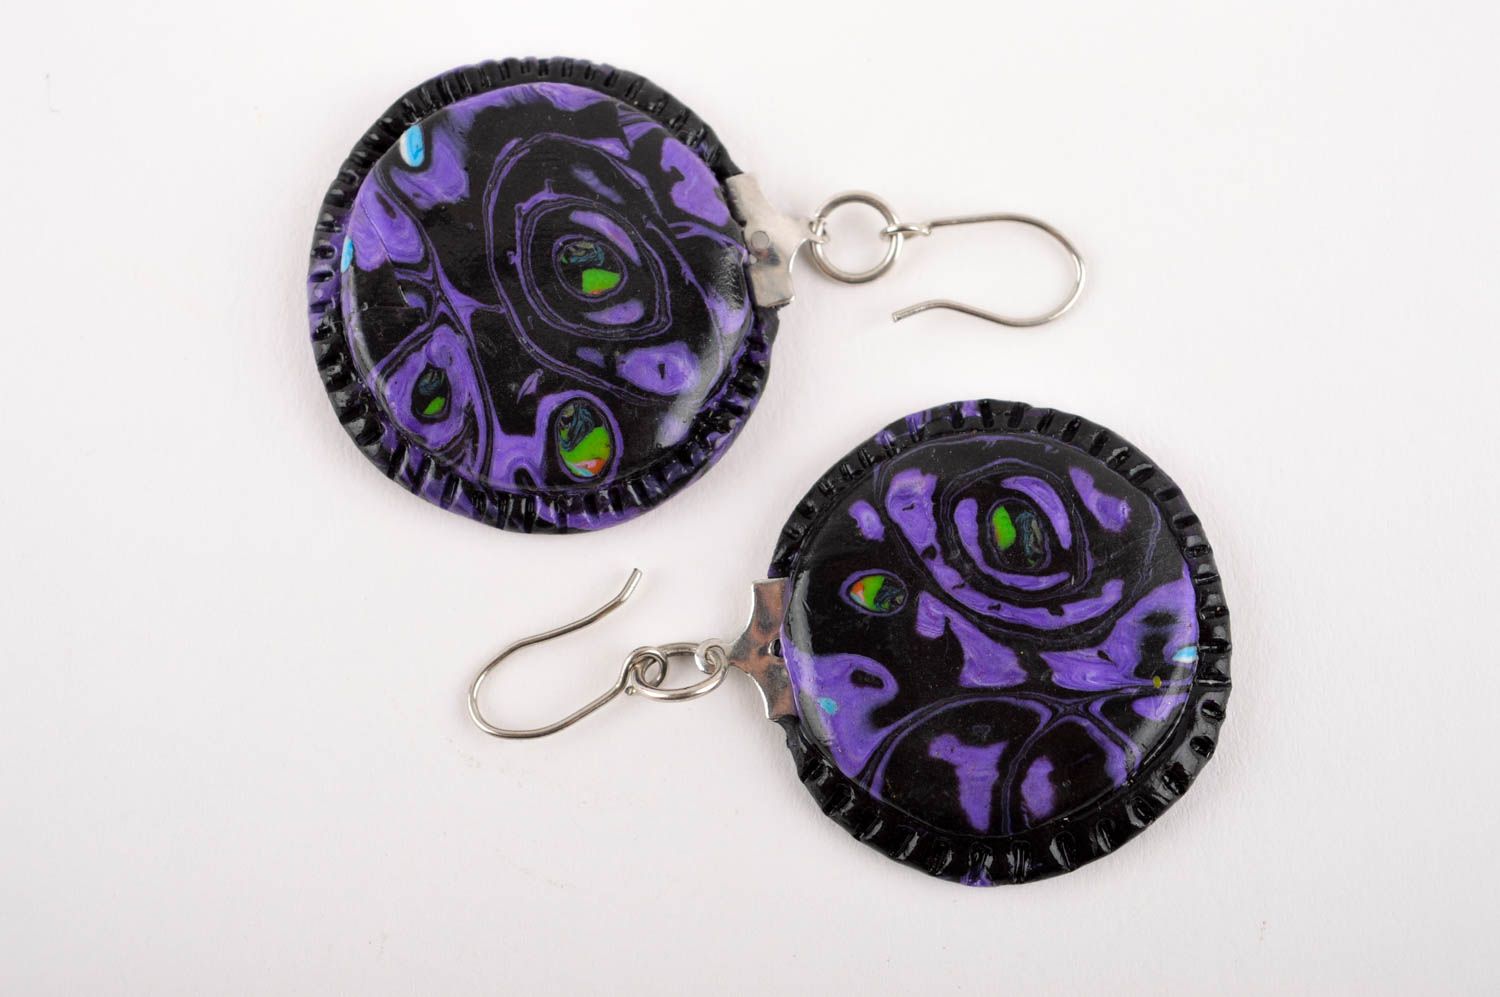 Handmade plastic earrings design round earrings polymer clay ideas gifts for her photo 4